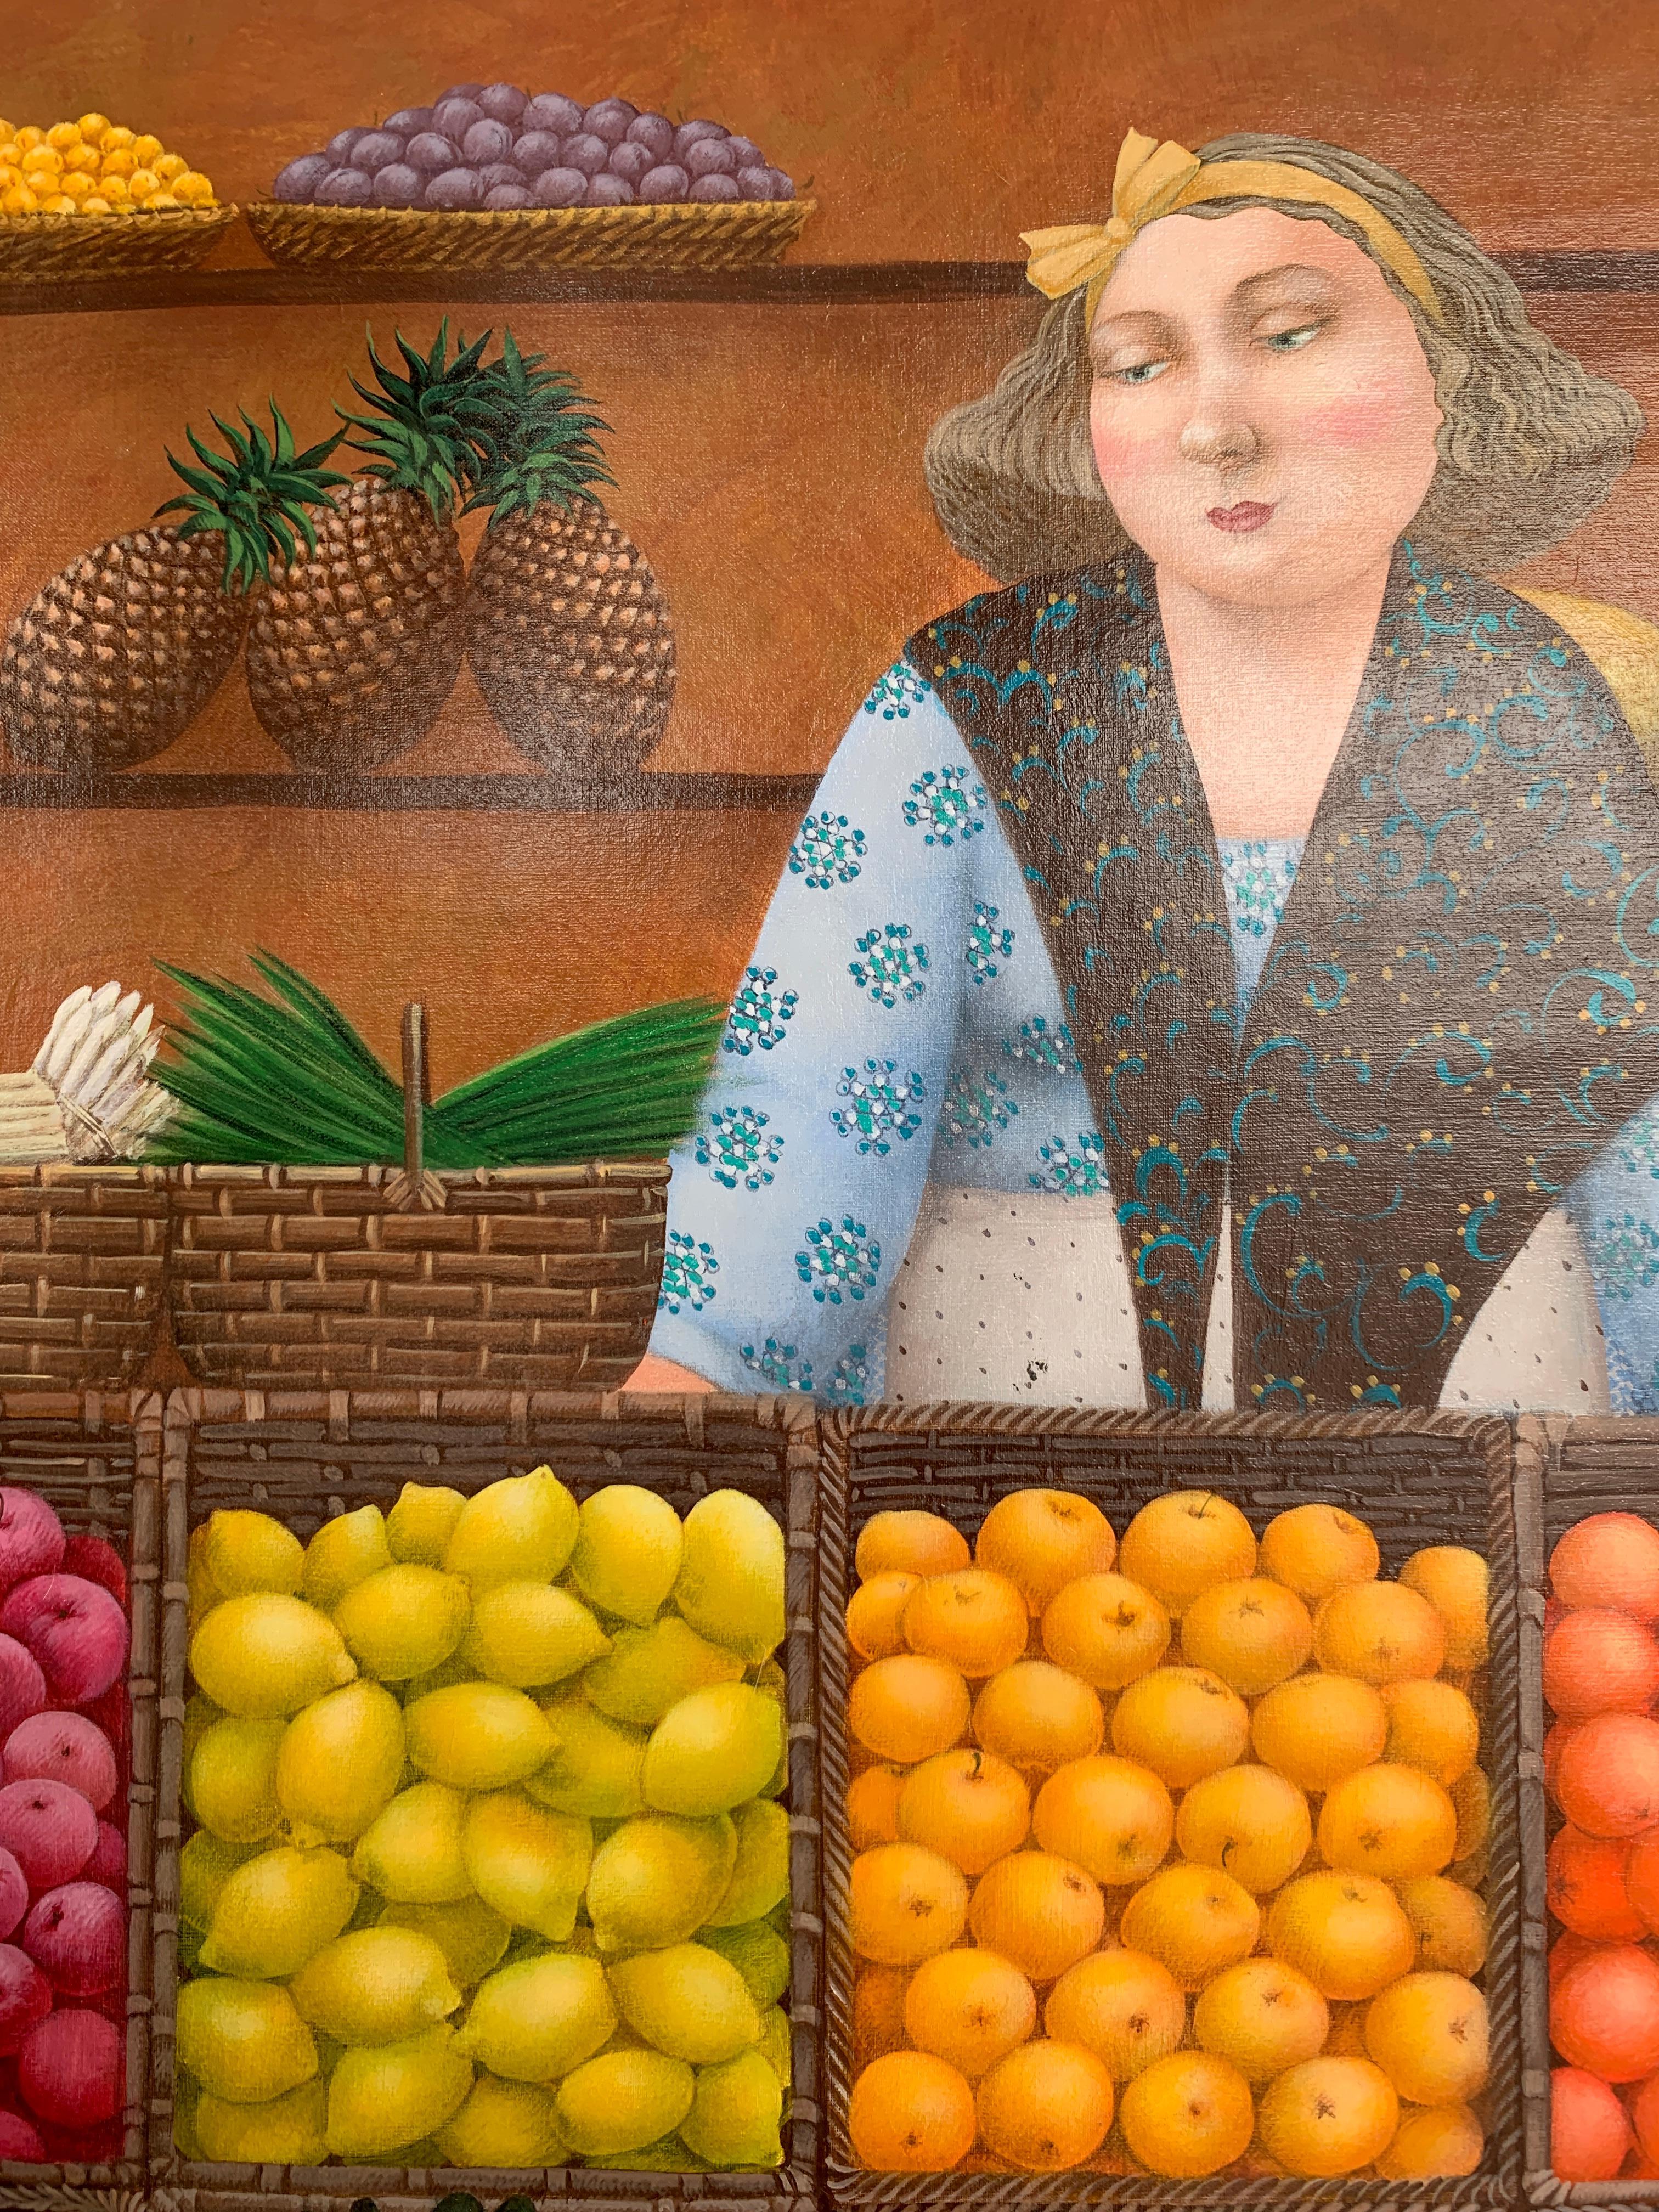 The Market (fruits, vegetables)-naive art, made in yellow, green, red, brown - Painting by Elena Narkevich